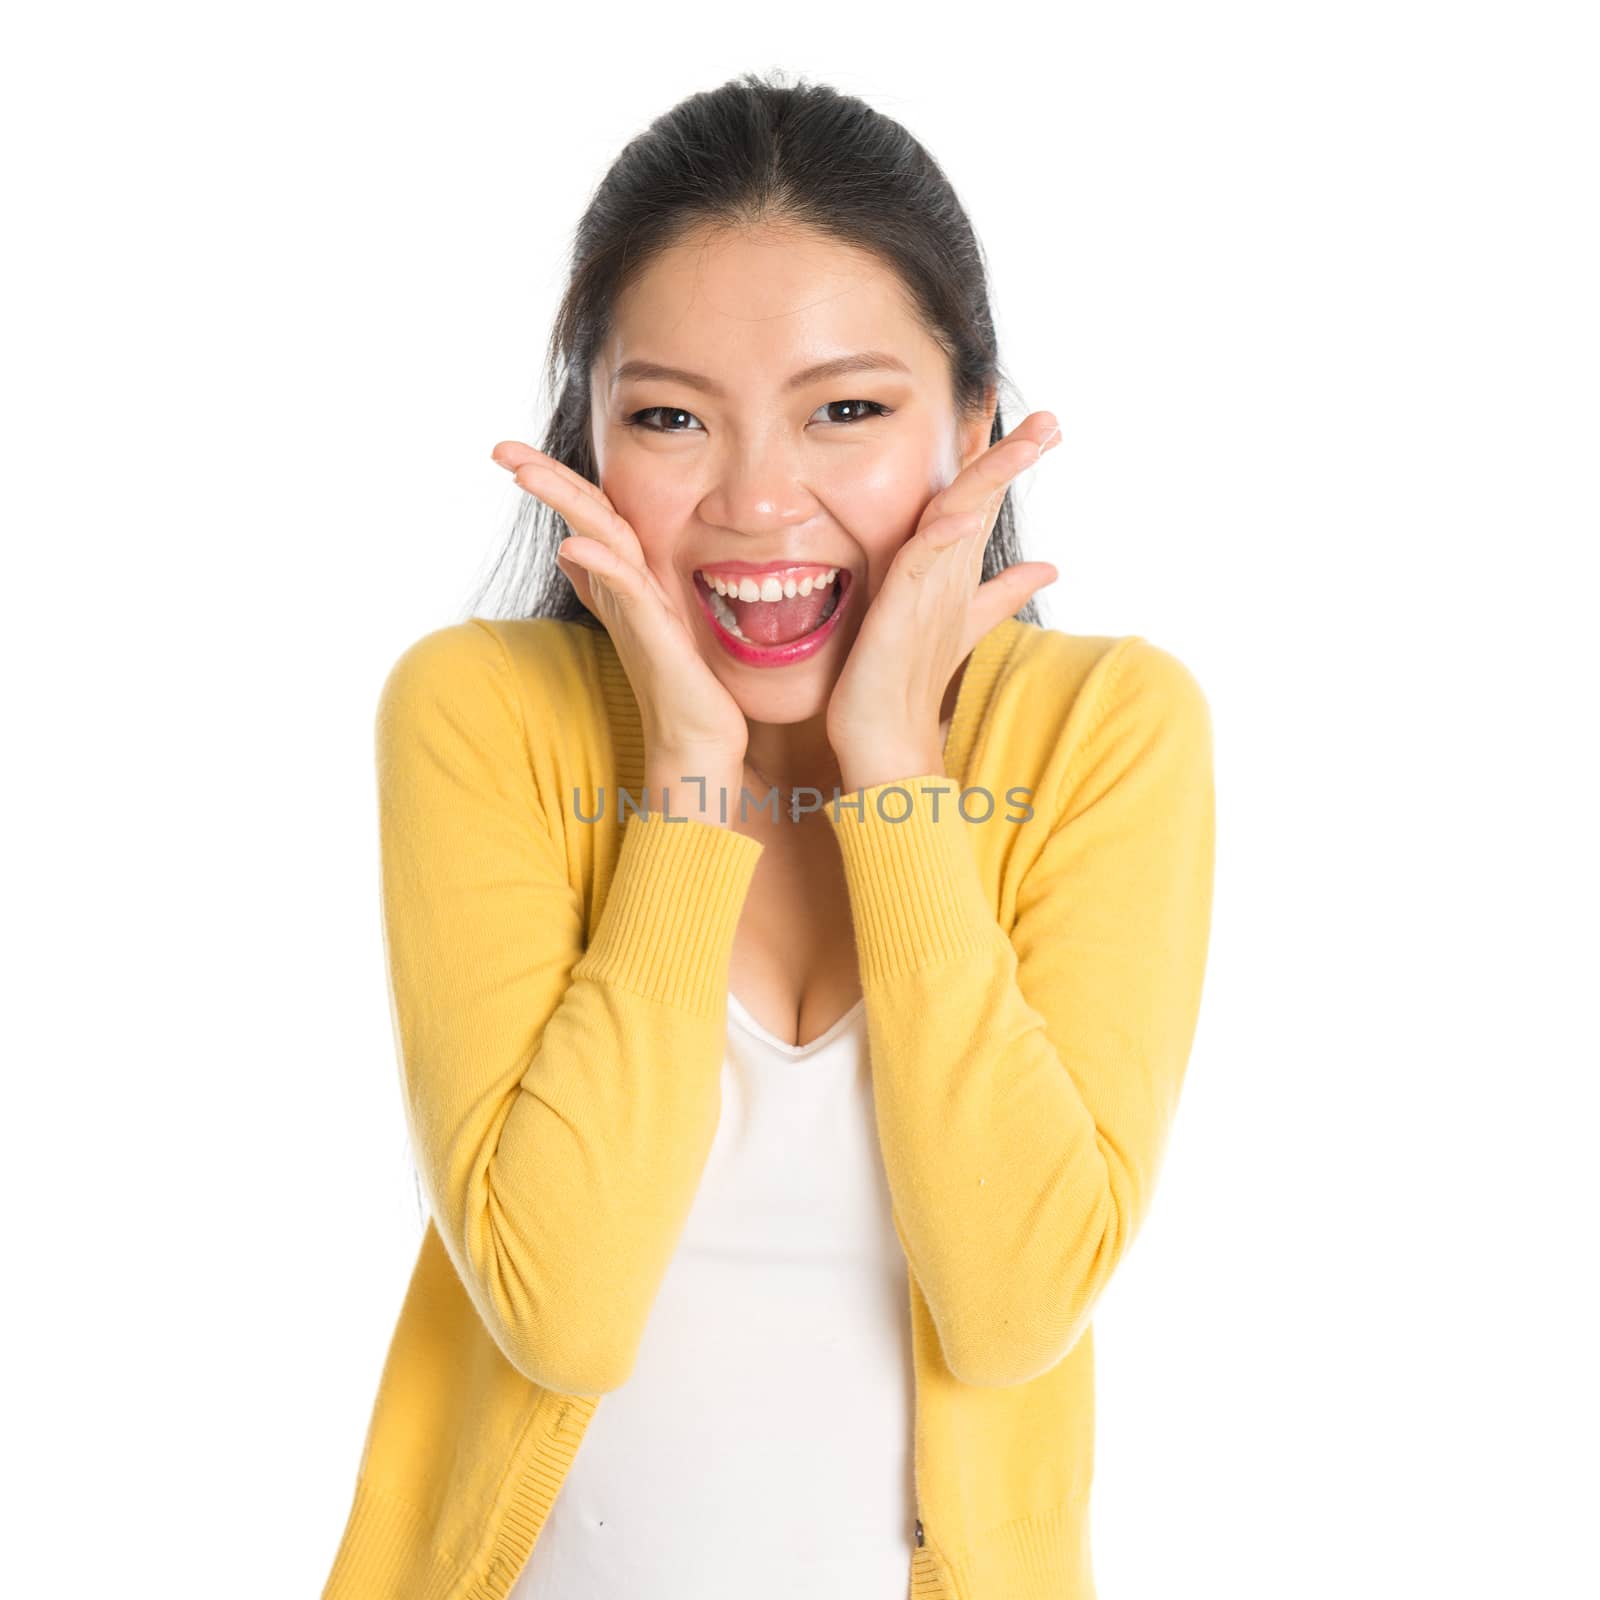 Young Asian girl surprises and shouts out, face expression, isolated on white background.